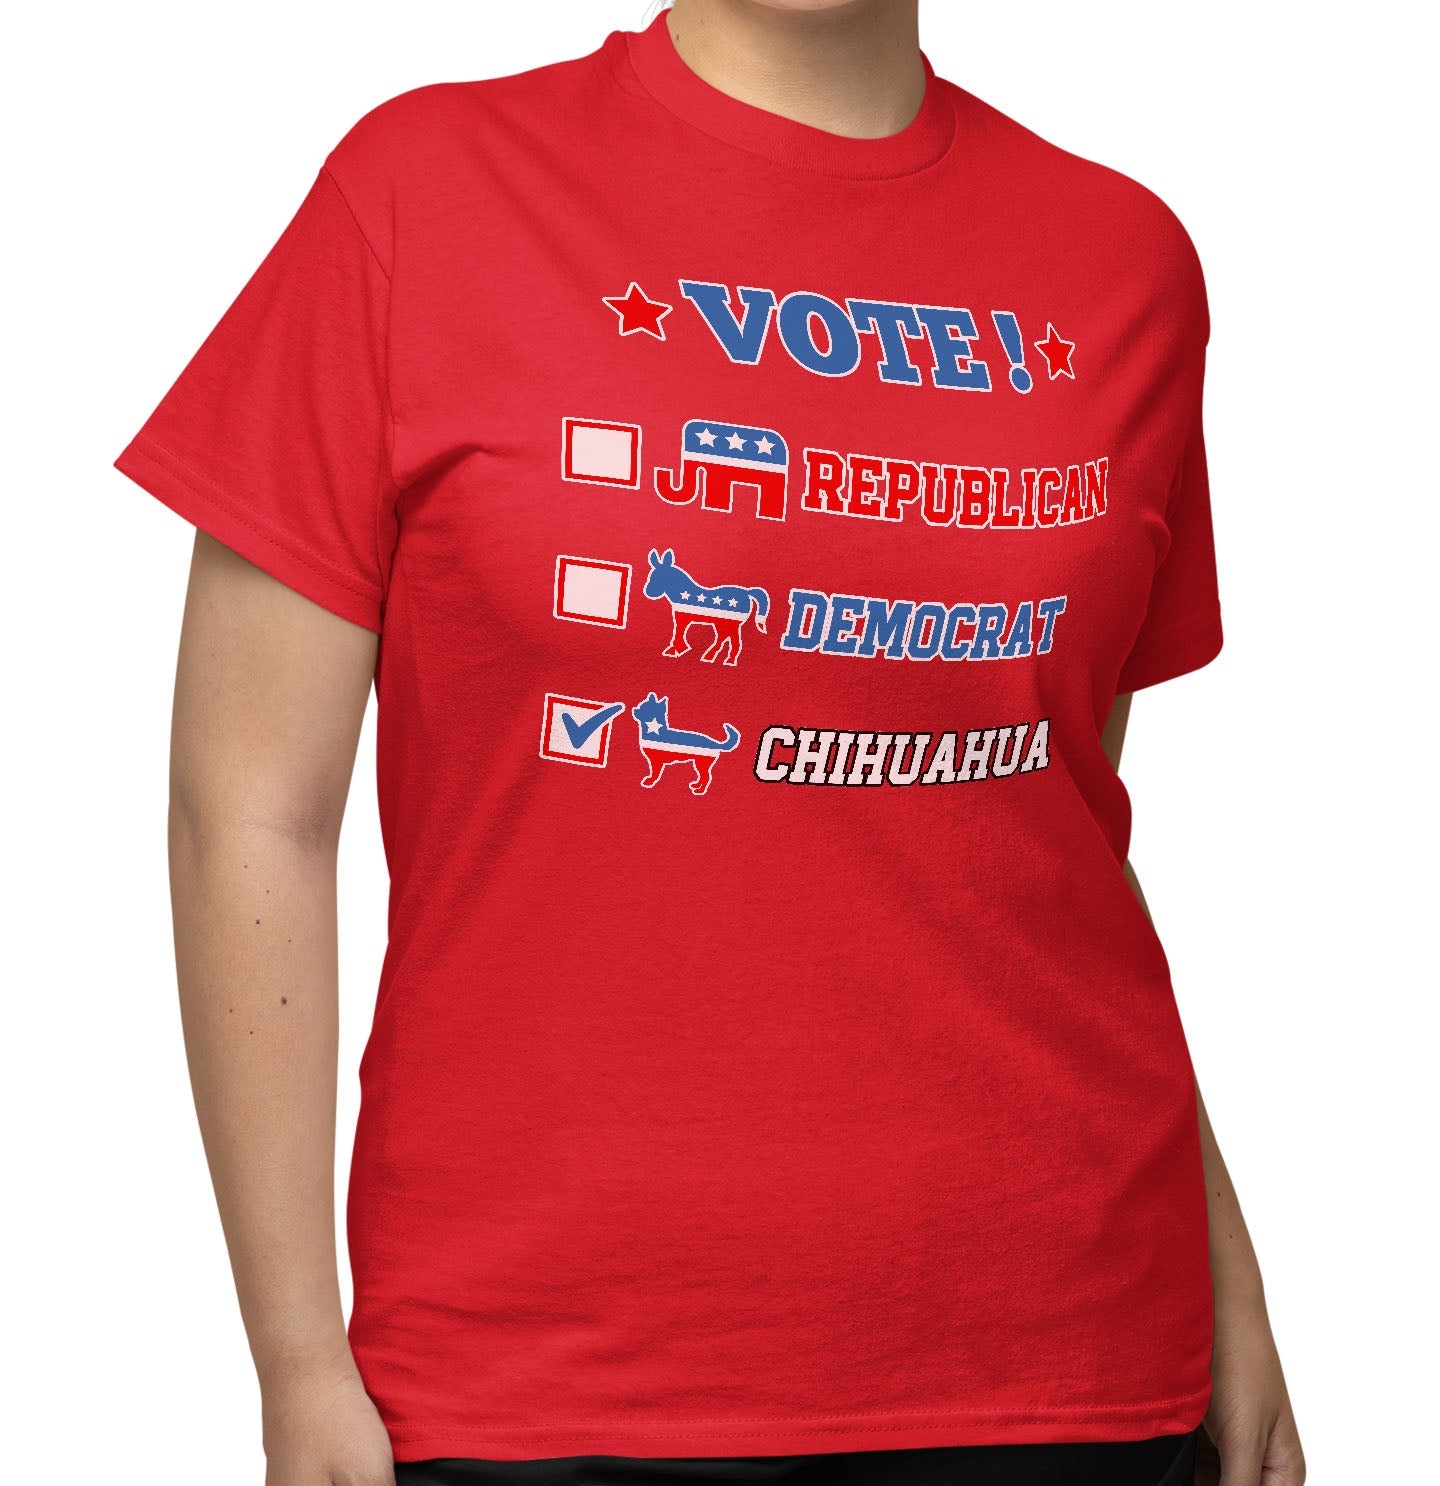 Vote for the Chihuahua (Short-Haired) - Adult Unisex T-Shirt